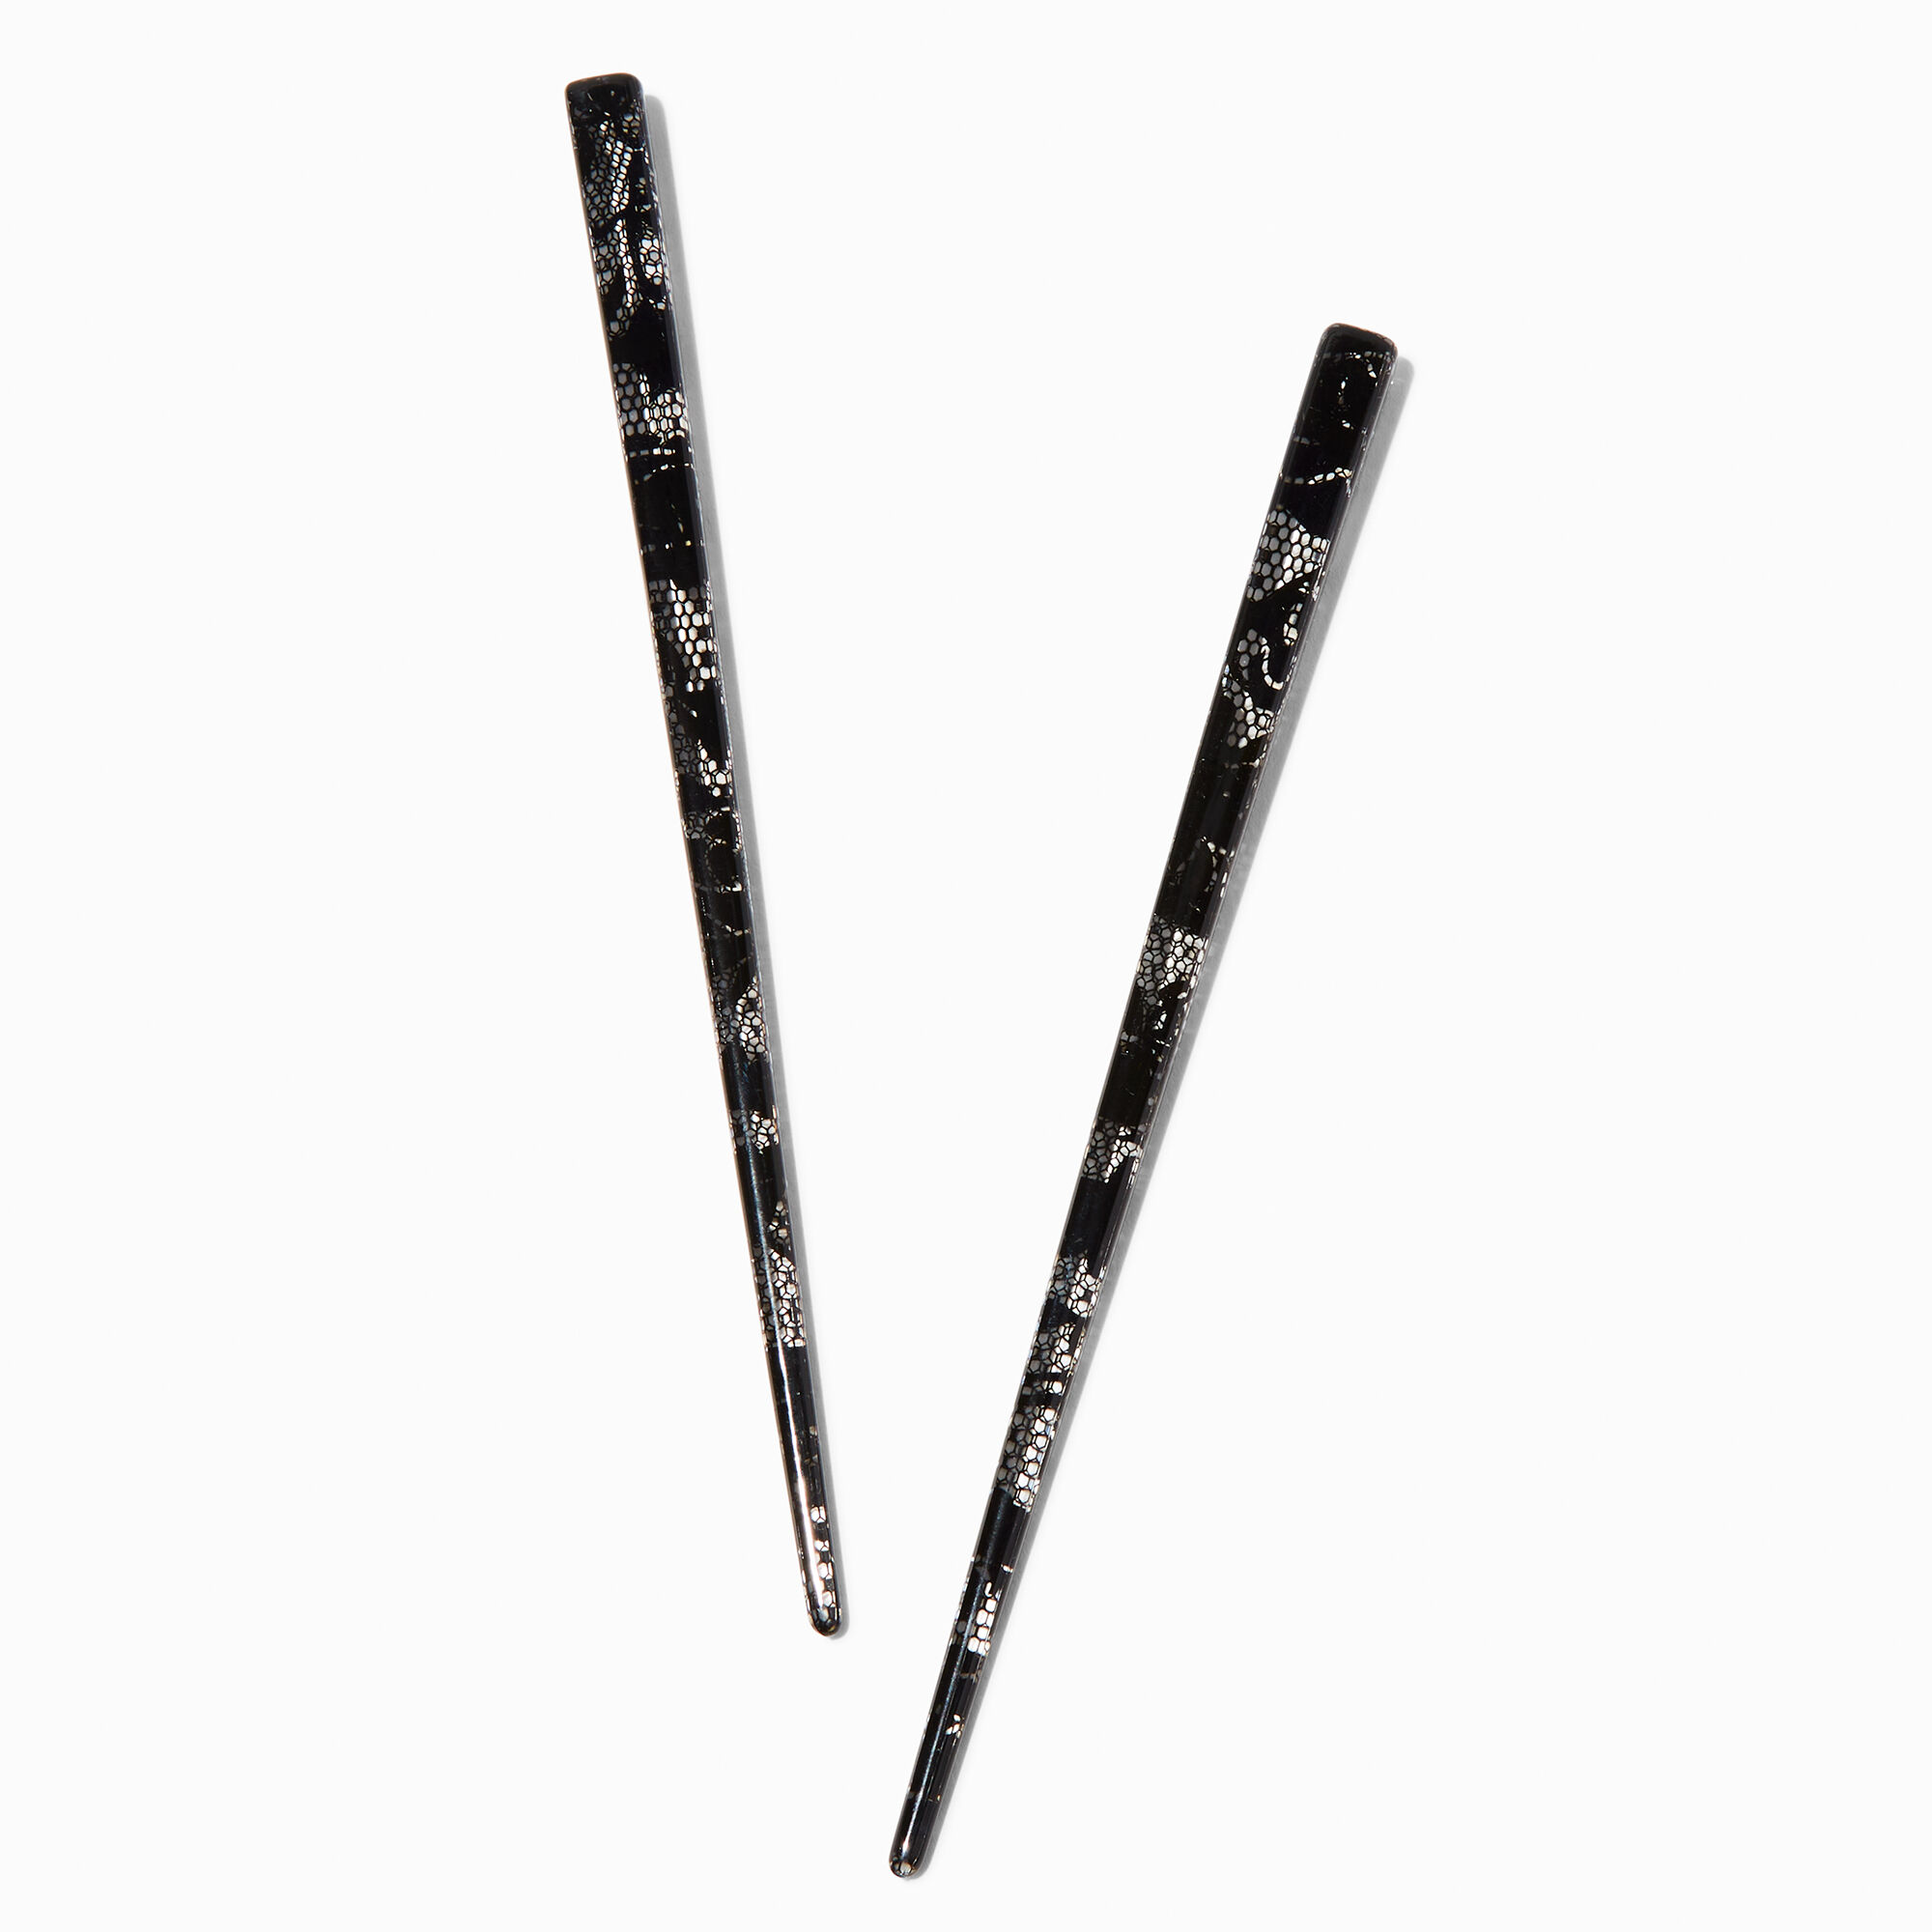 View Claires Lace Hair Sticks 2 Pack Black information